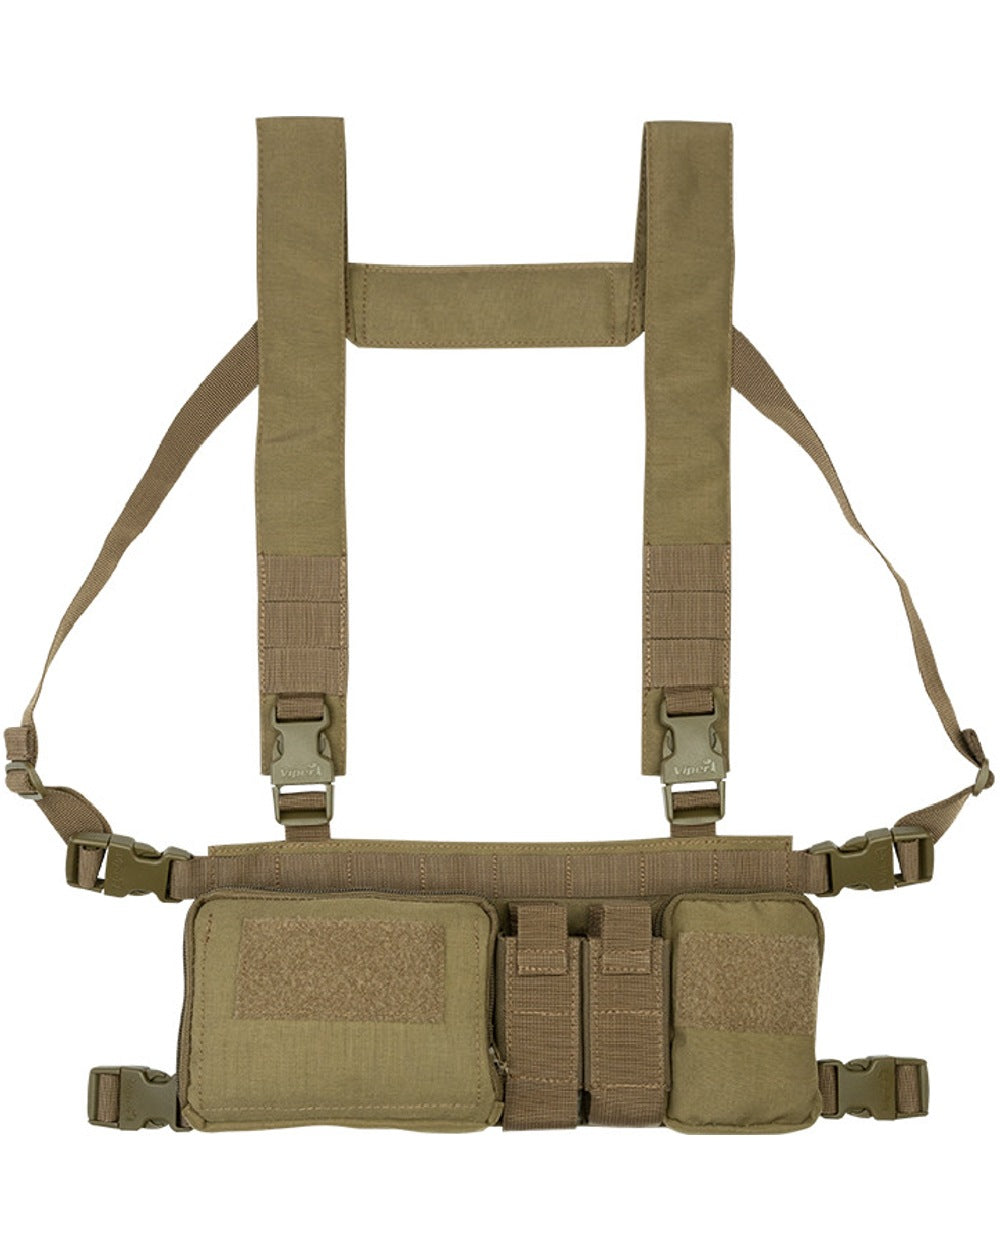 Viper VX Buckle Up Ready Rig in Coyote 